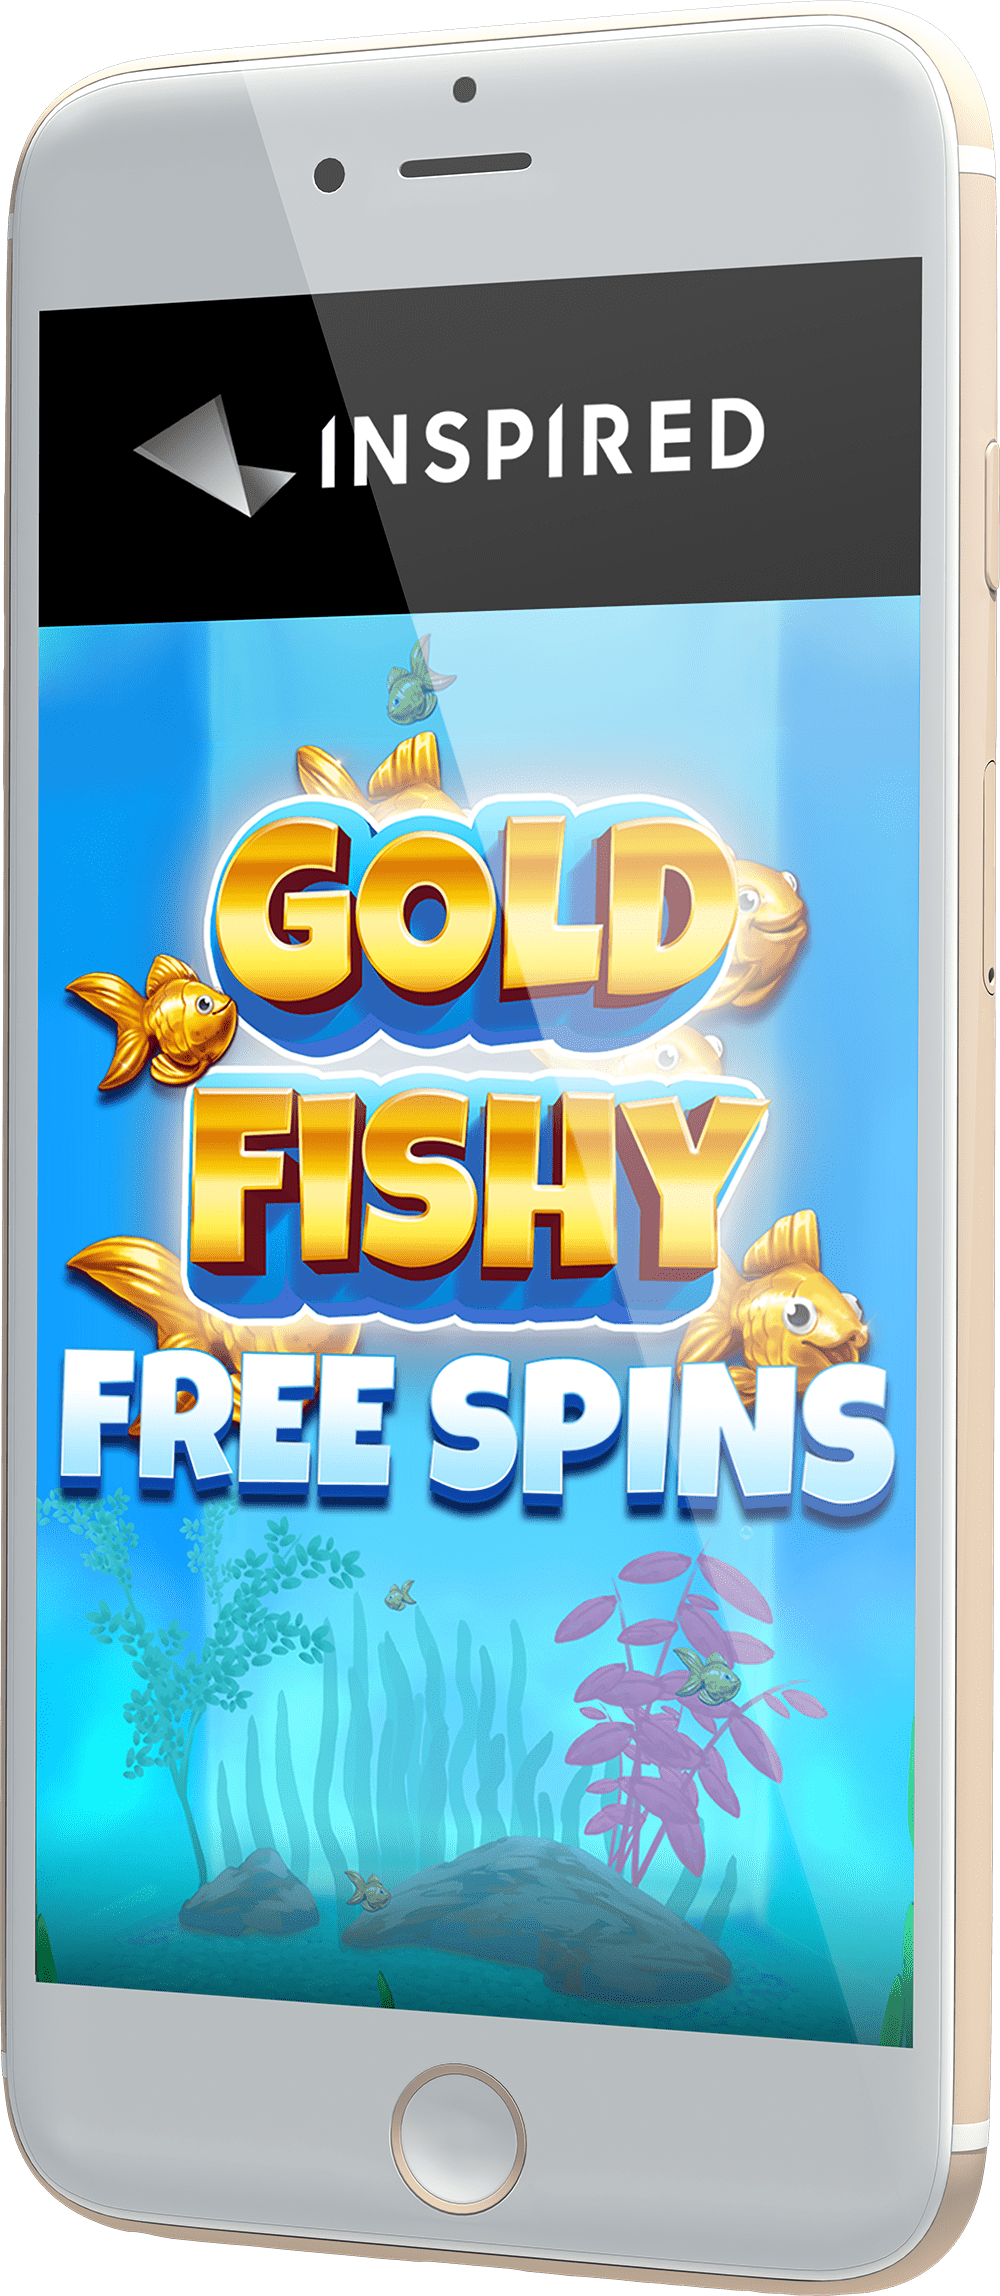 Gold Fishy Free Spins iPhone